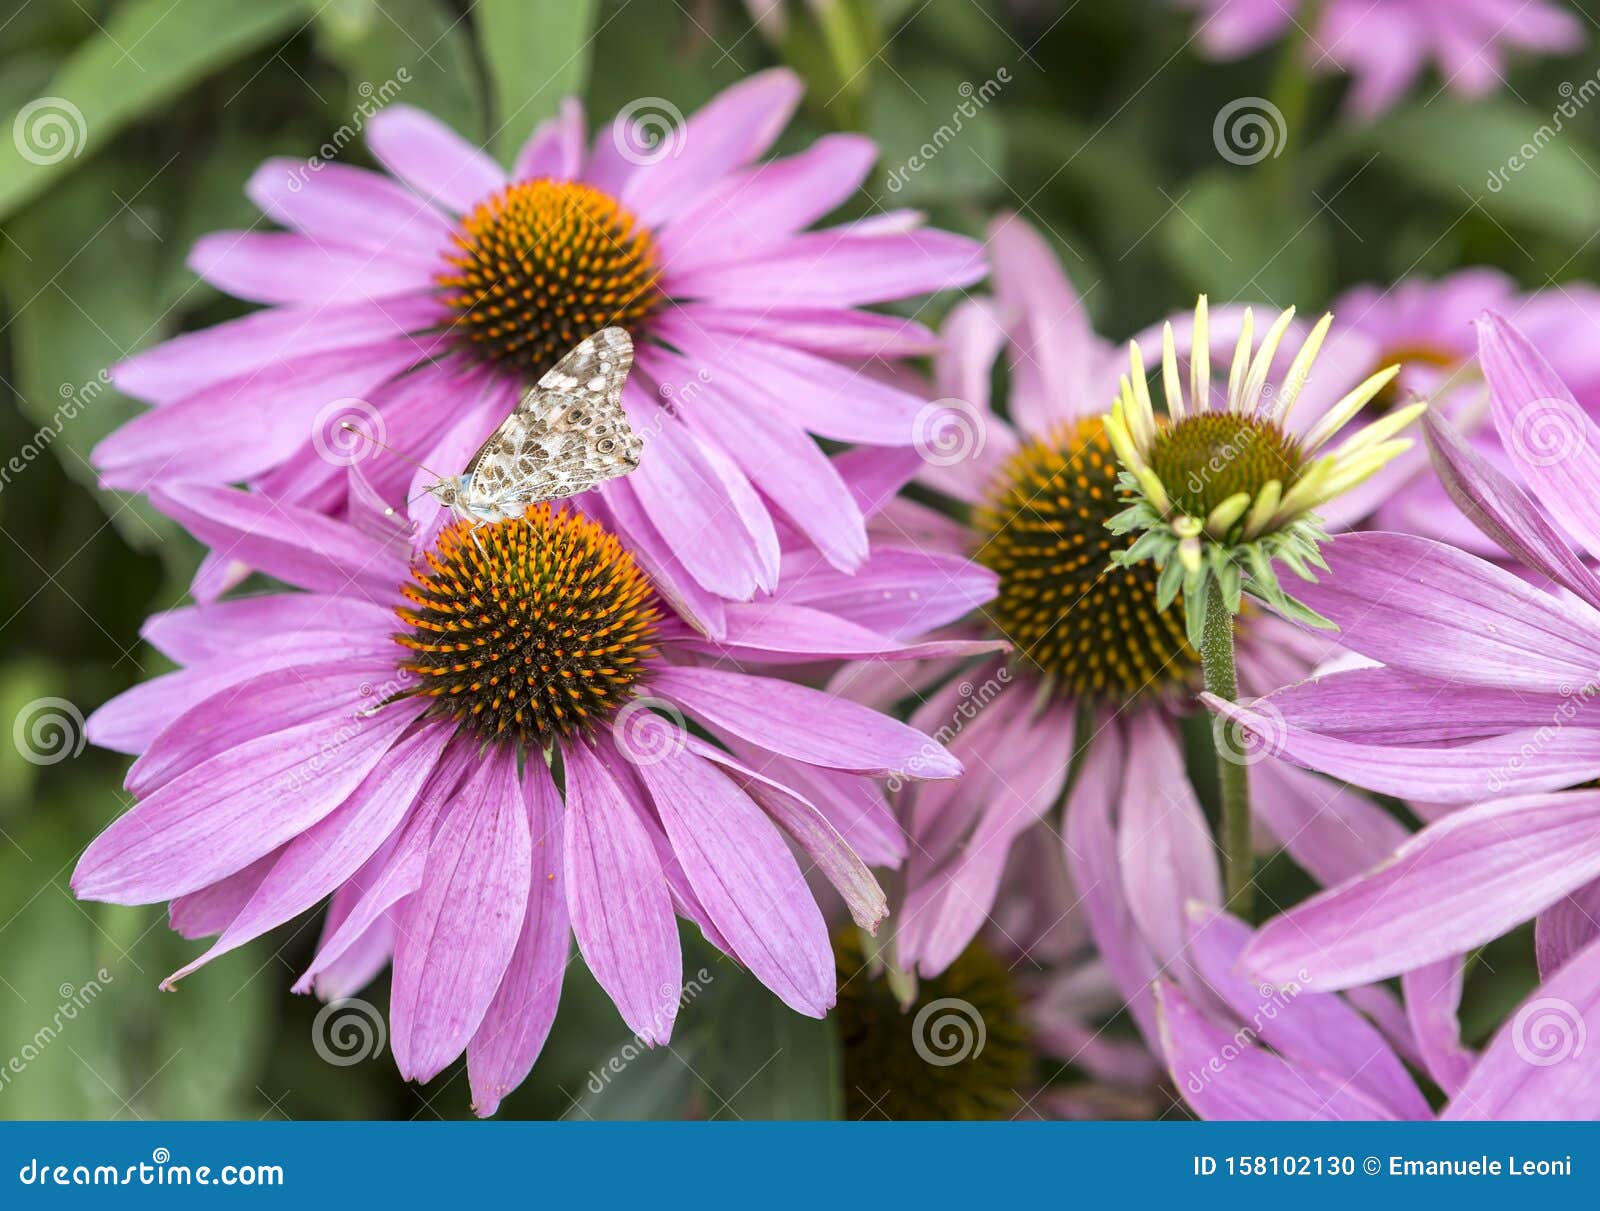 echinacea purpurea is a perennial herbaceous plant.it is a wild flower of compositae, named because its head is very similar to